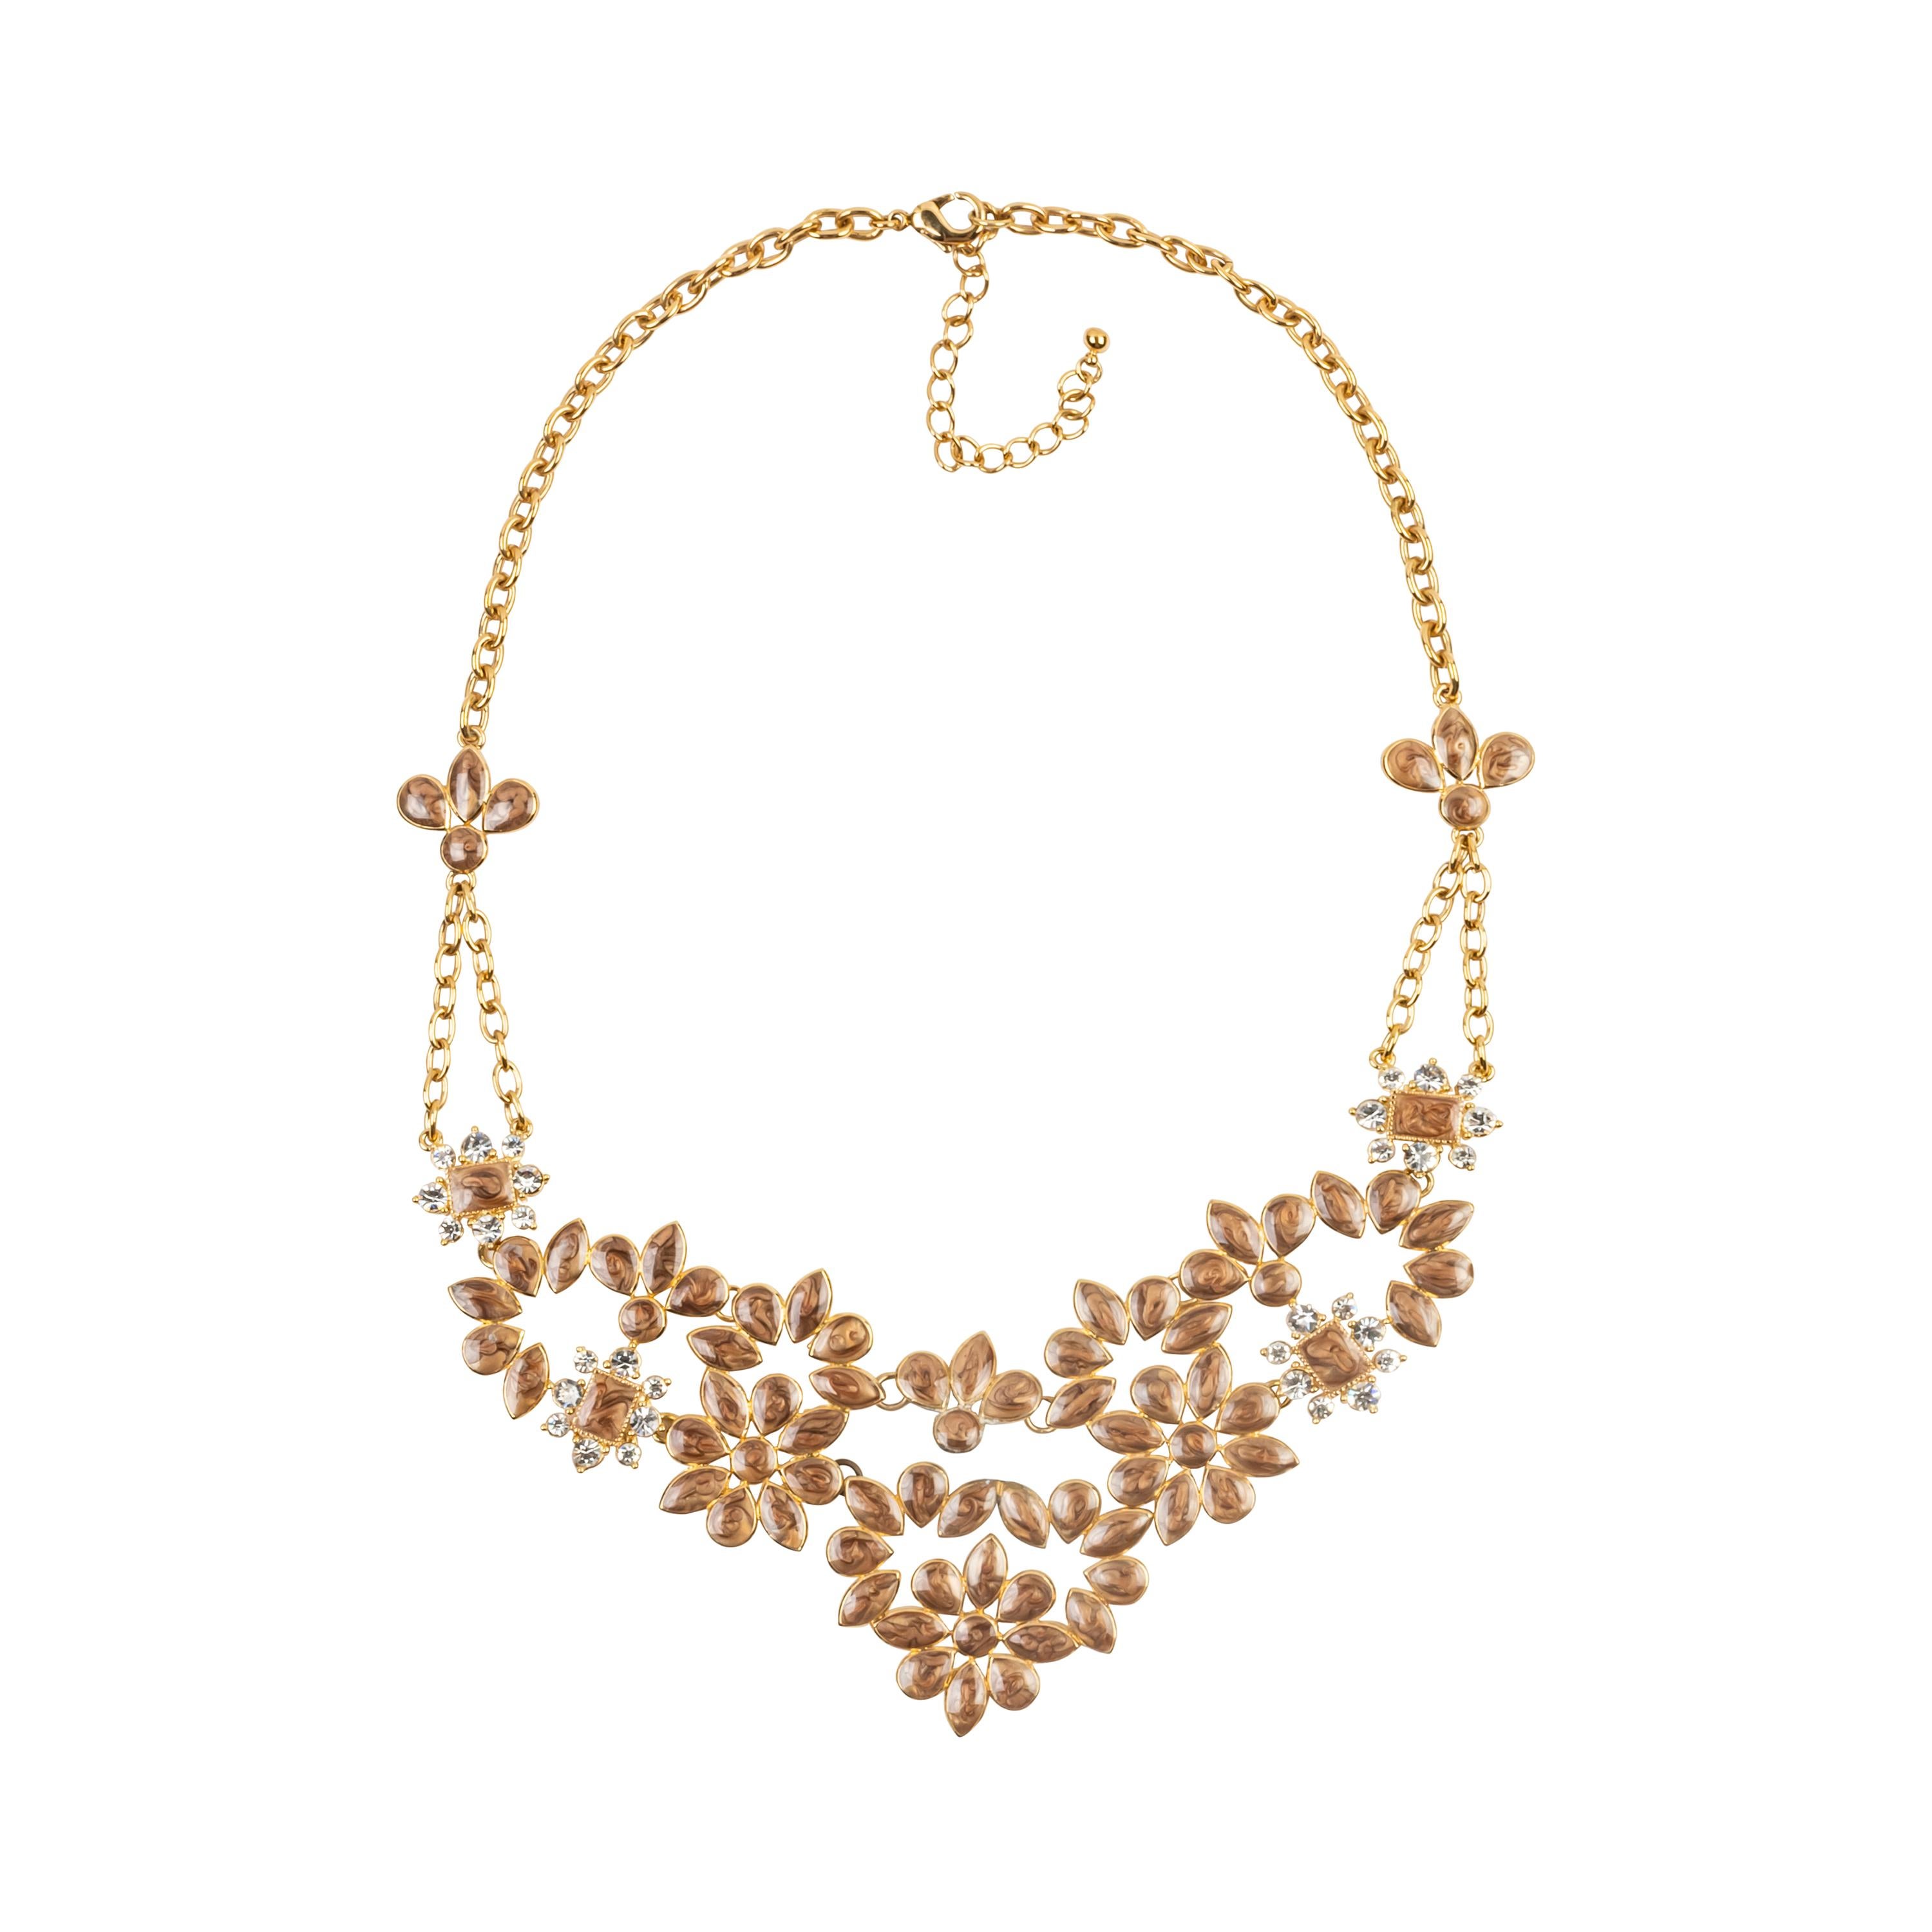 Bochic bijoux necklace.
This beautiful necklace feels and looks like fine jewlery worn on the red carpet or for that special night out or party. 
It has attention to details reserved usually for fine jewlery. 
Gold links with cognac color enamel